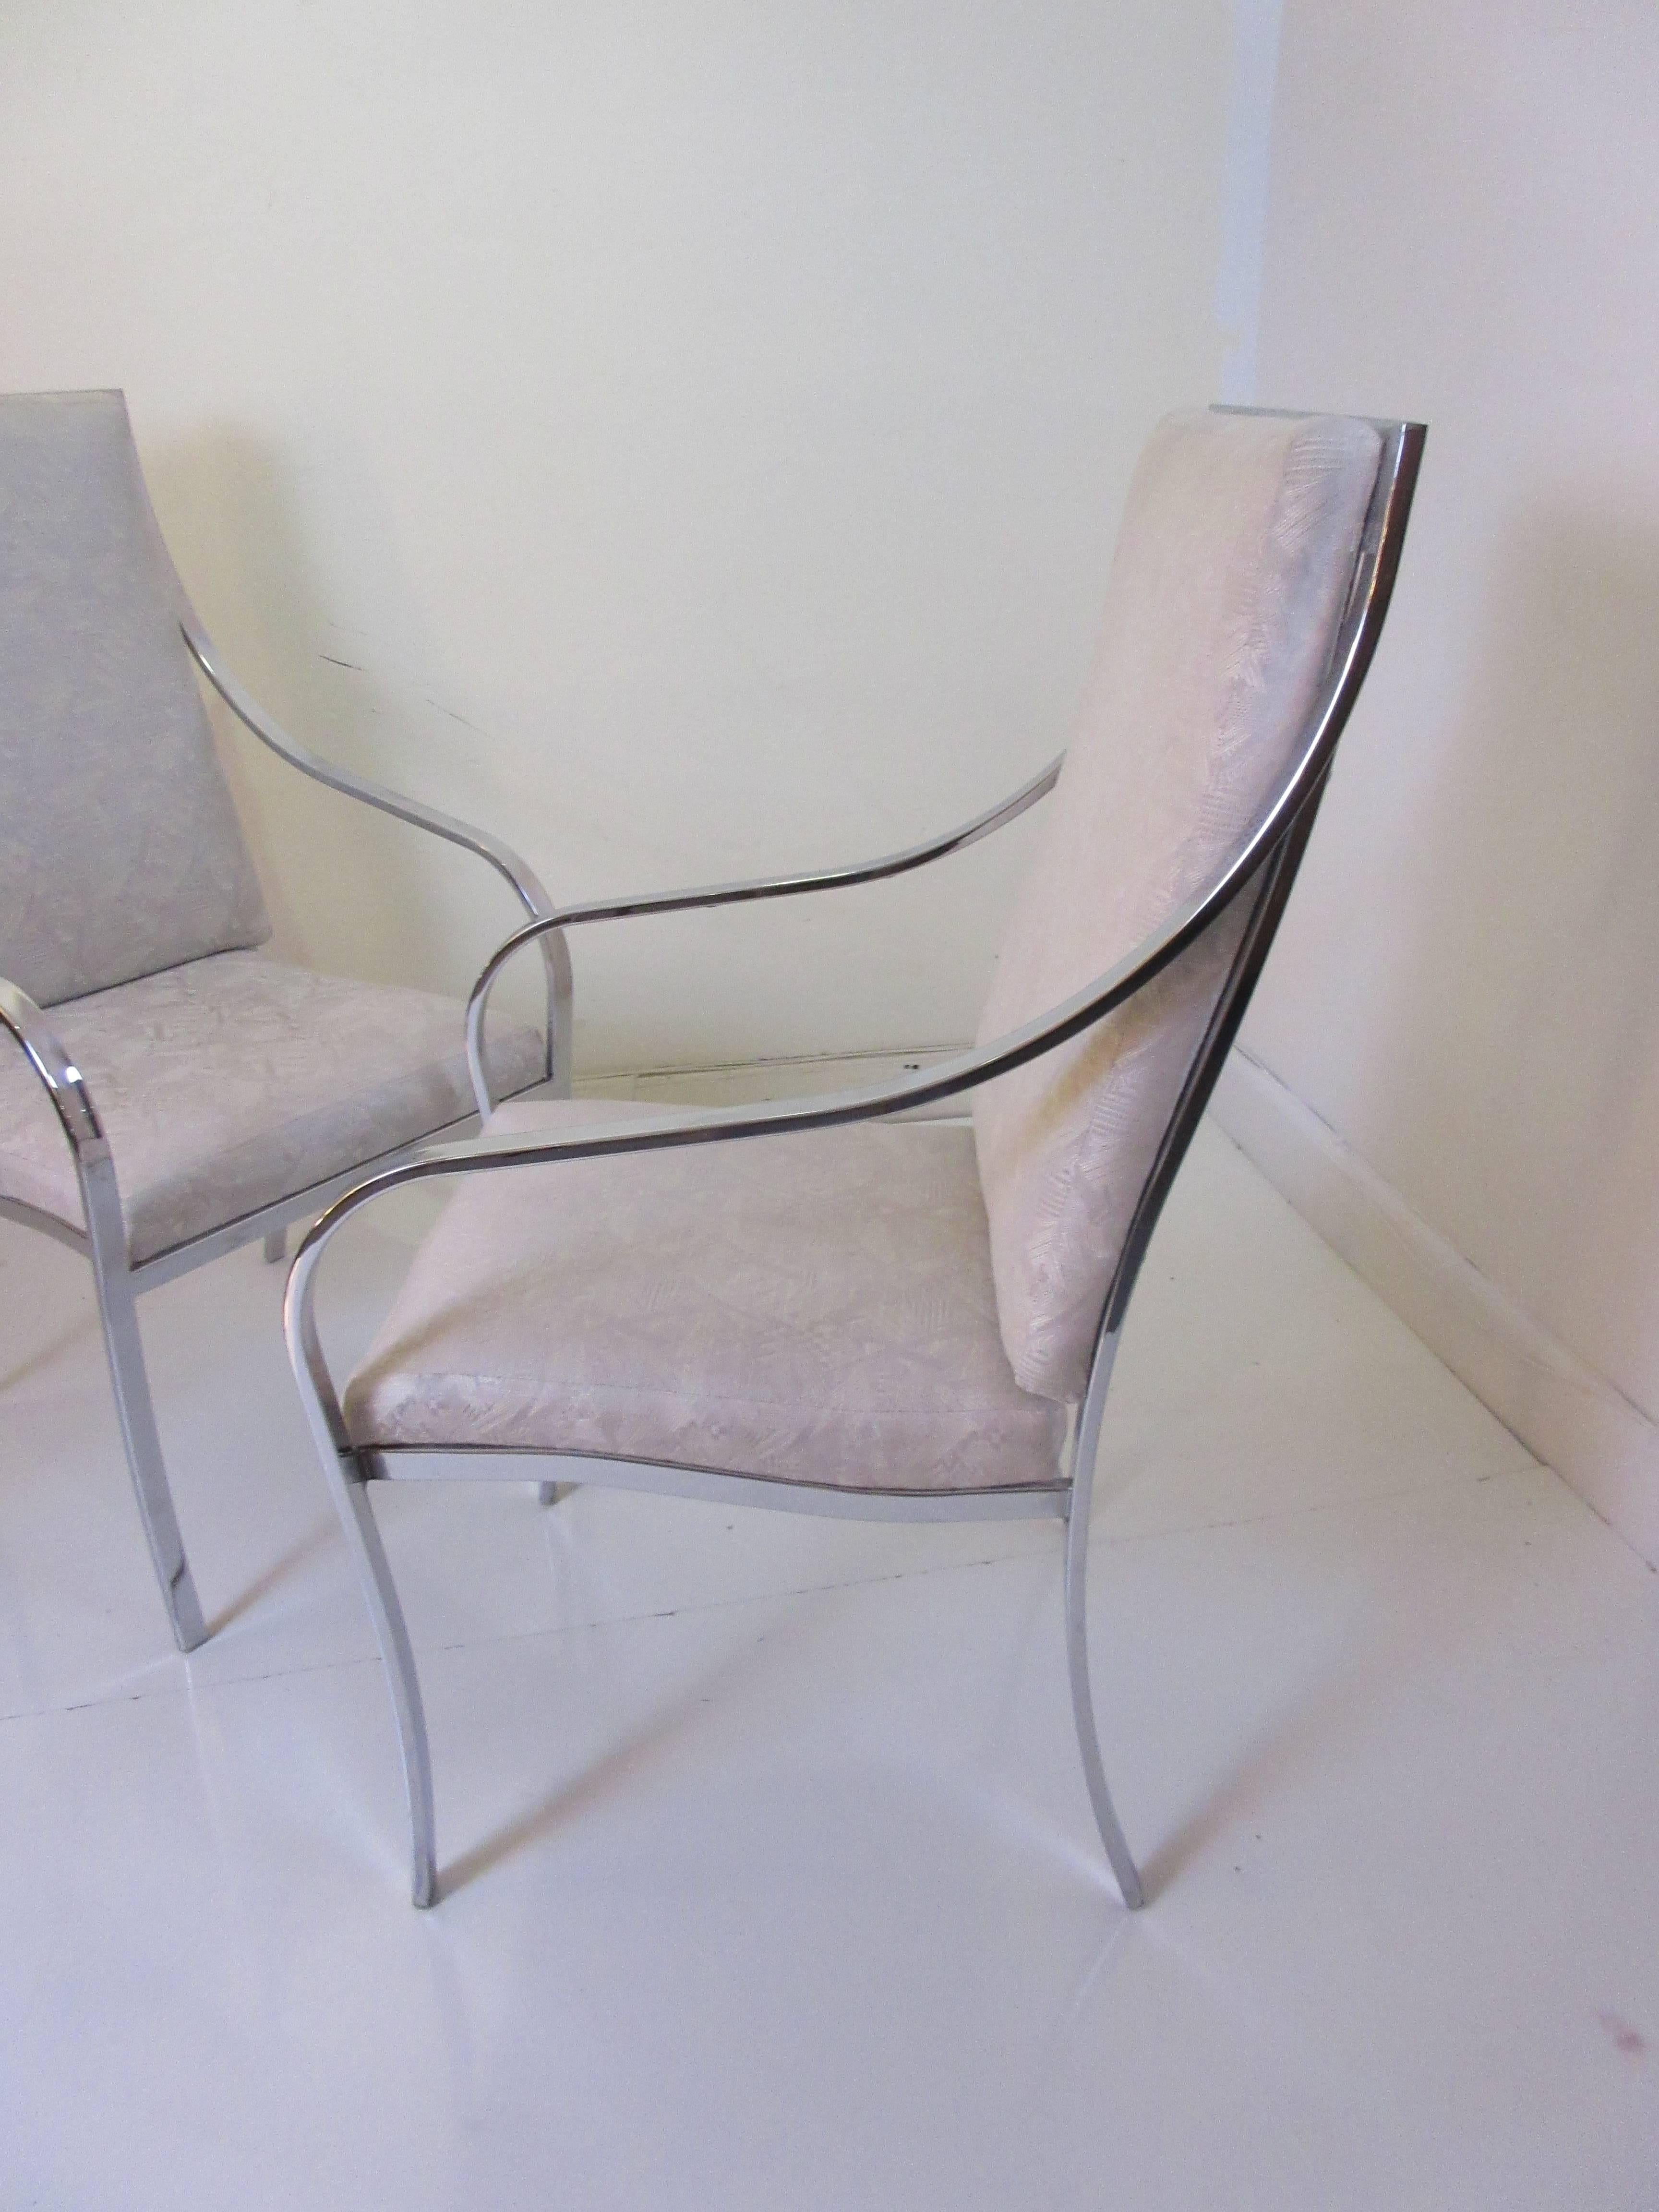 Milo Baughman for Thayer Coggin six dining chairs with swooping chrome arms and original deco Revival Clarence house fabric in shades of silver and grey with geometric designs showing minimal wear. Chrome is immpecable and all the white plastic